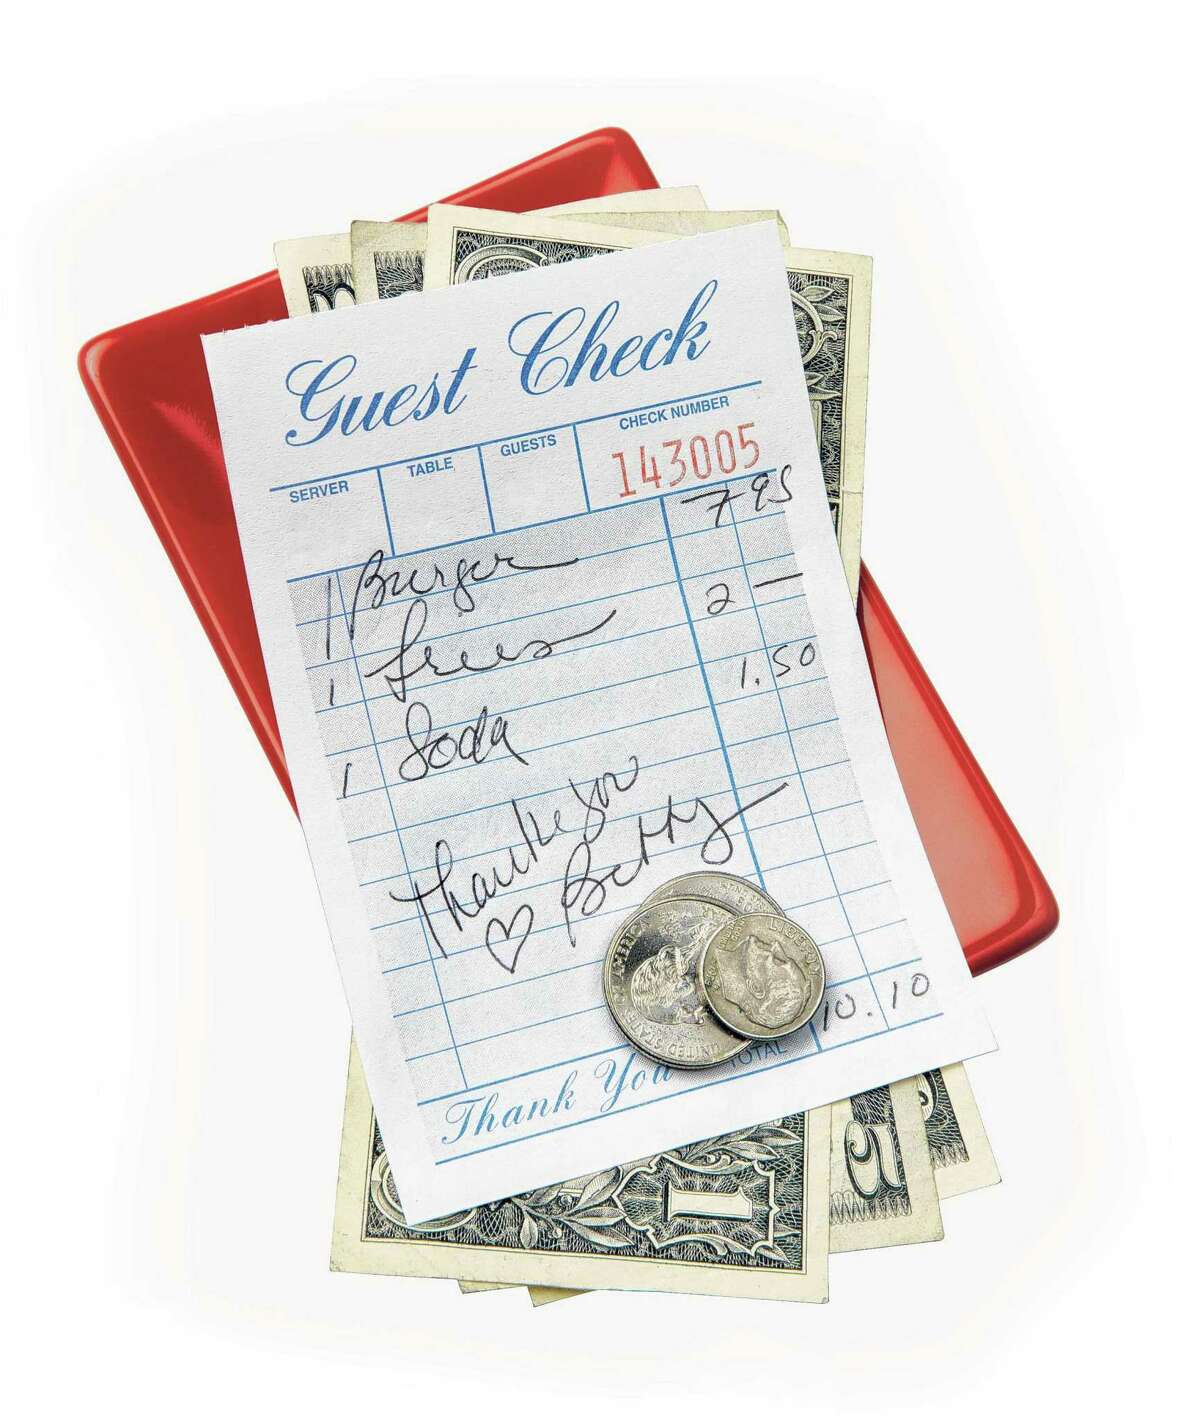 Restaurant bill, dollars and change shot on red tray